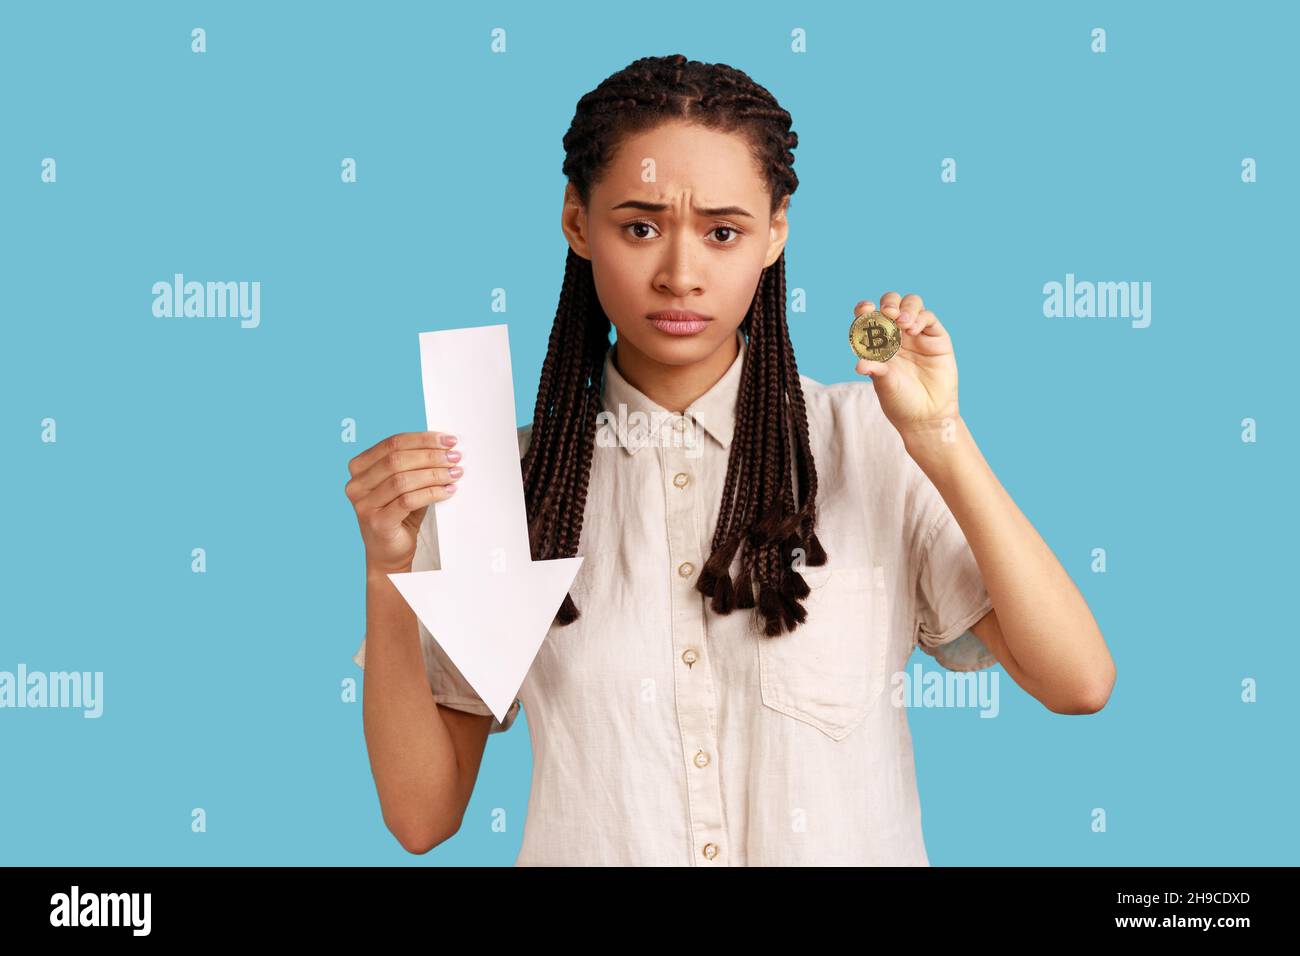 Portrait of dissatisfied woman with dreadlocks showing gold bitcoin and arrow pointing down, downgrade of electronic currency, wearing white shirt. Indoor studio shot isolated on blue background. Stock Photo